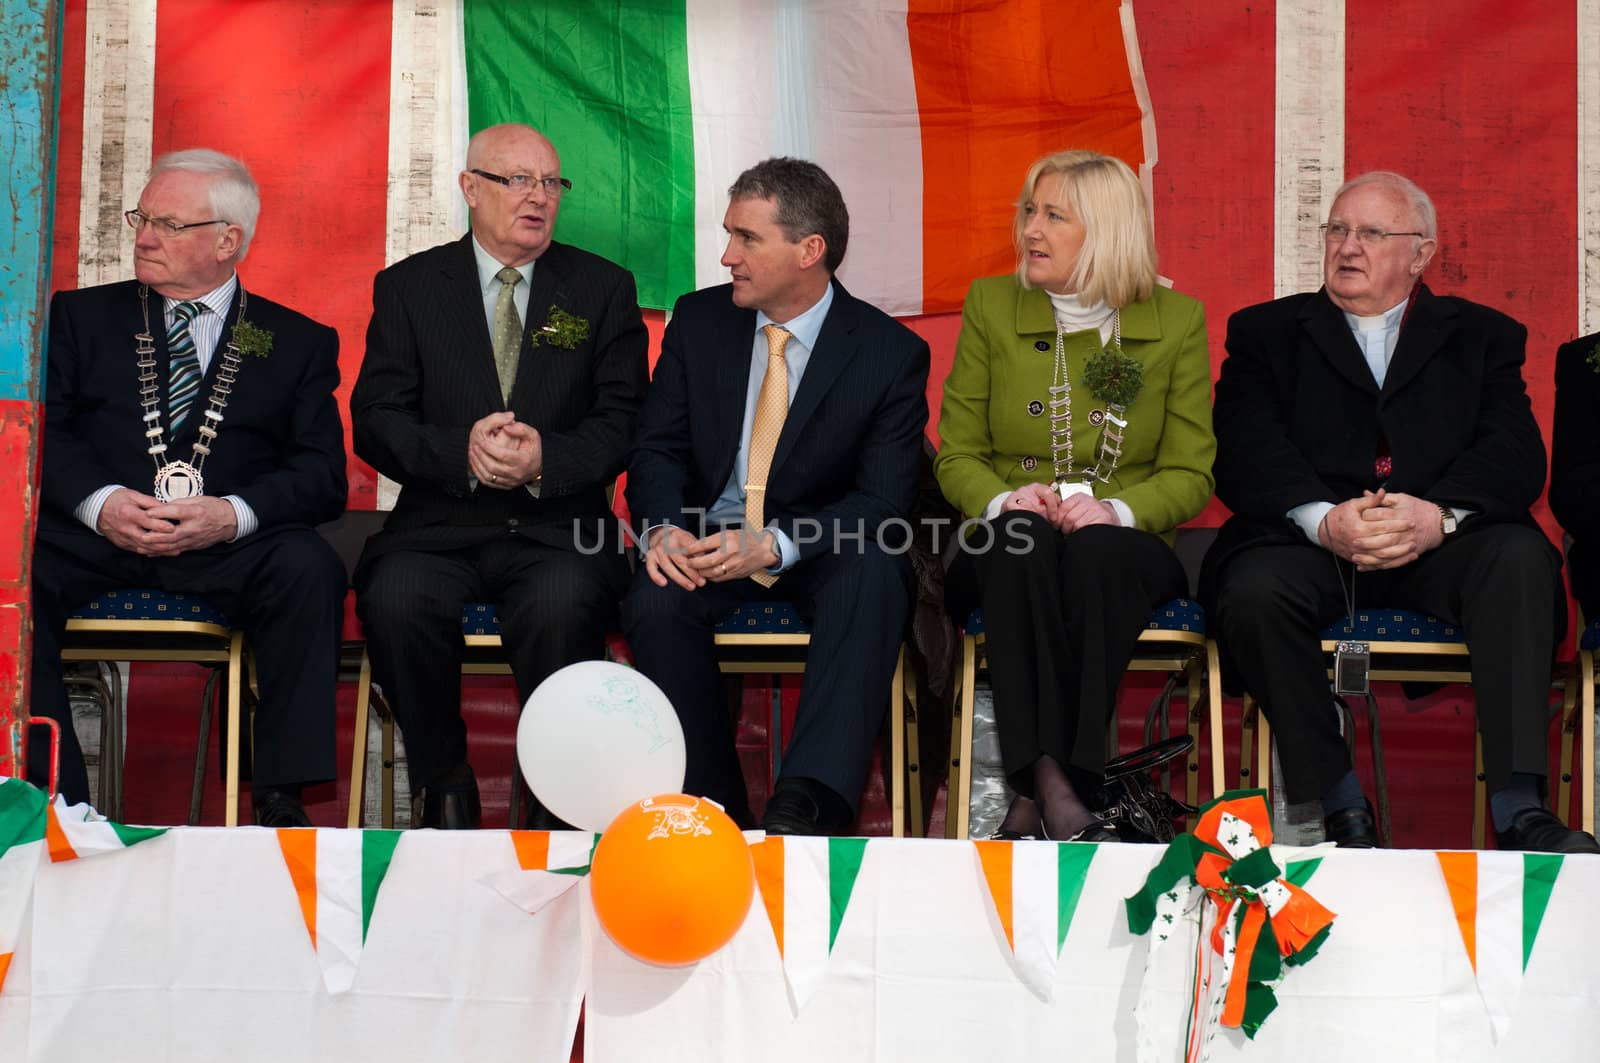 MALLOW, IRELAND - MARCH 17: unidentified jury at the St. Patrick's day on March 17, 2012 in Mallow, Ireland. This national Irish holiday takes place annually in March, event was held during the afernoon of March 17th 2012.